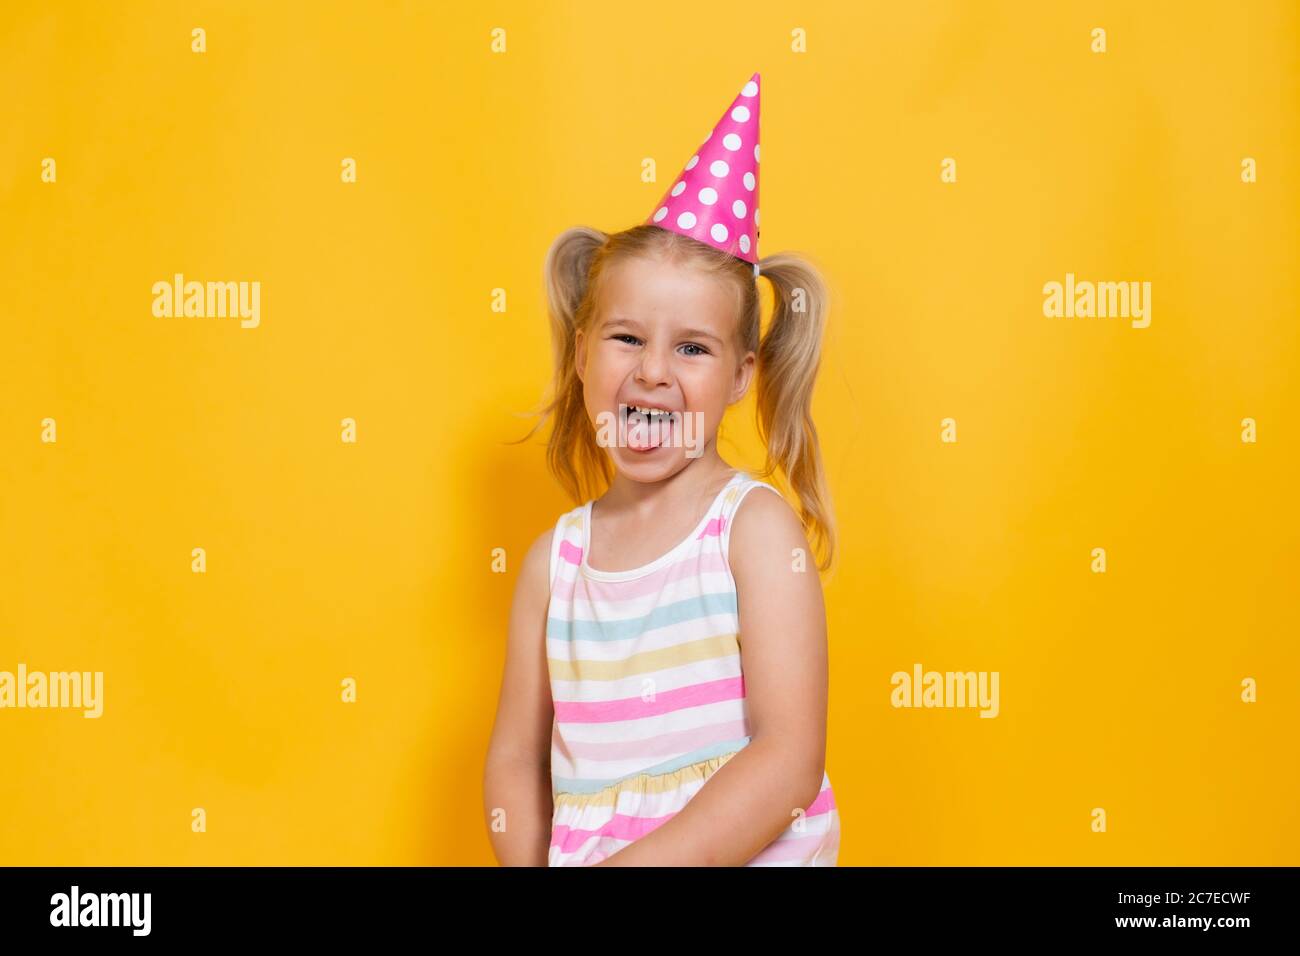 Happy birthday child girl with two ponytales in pink cap on colored yellow background shoing her tongue. Stock Photo